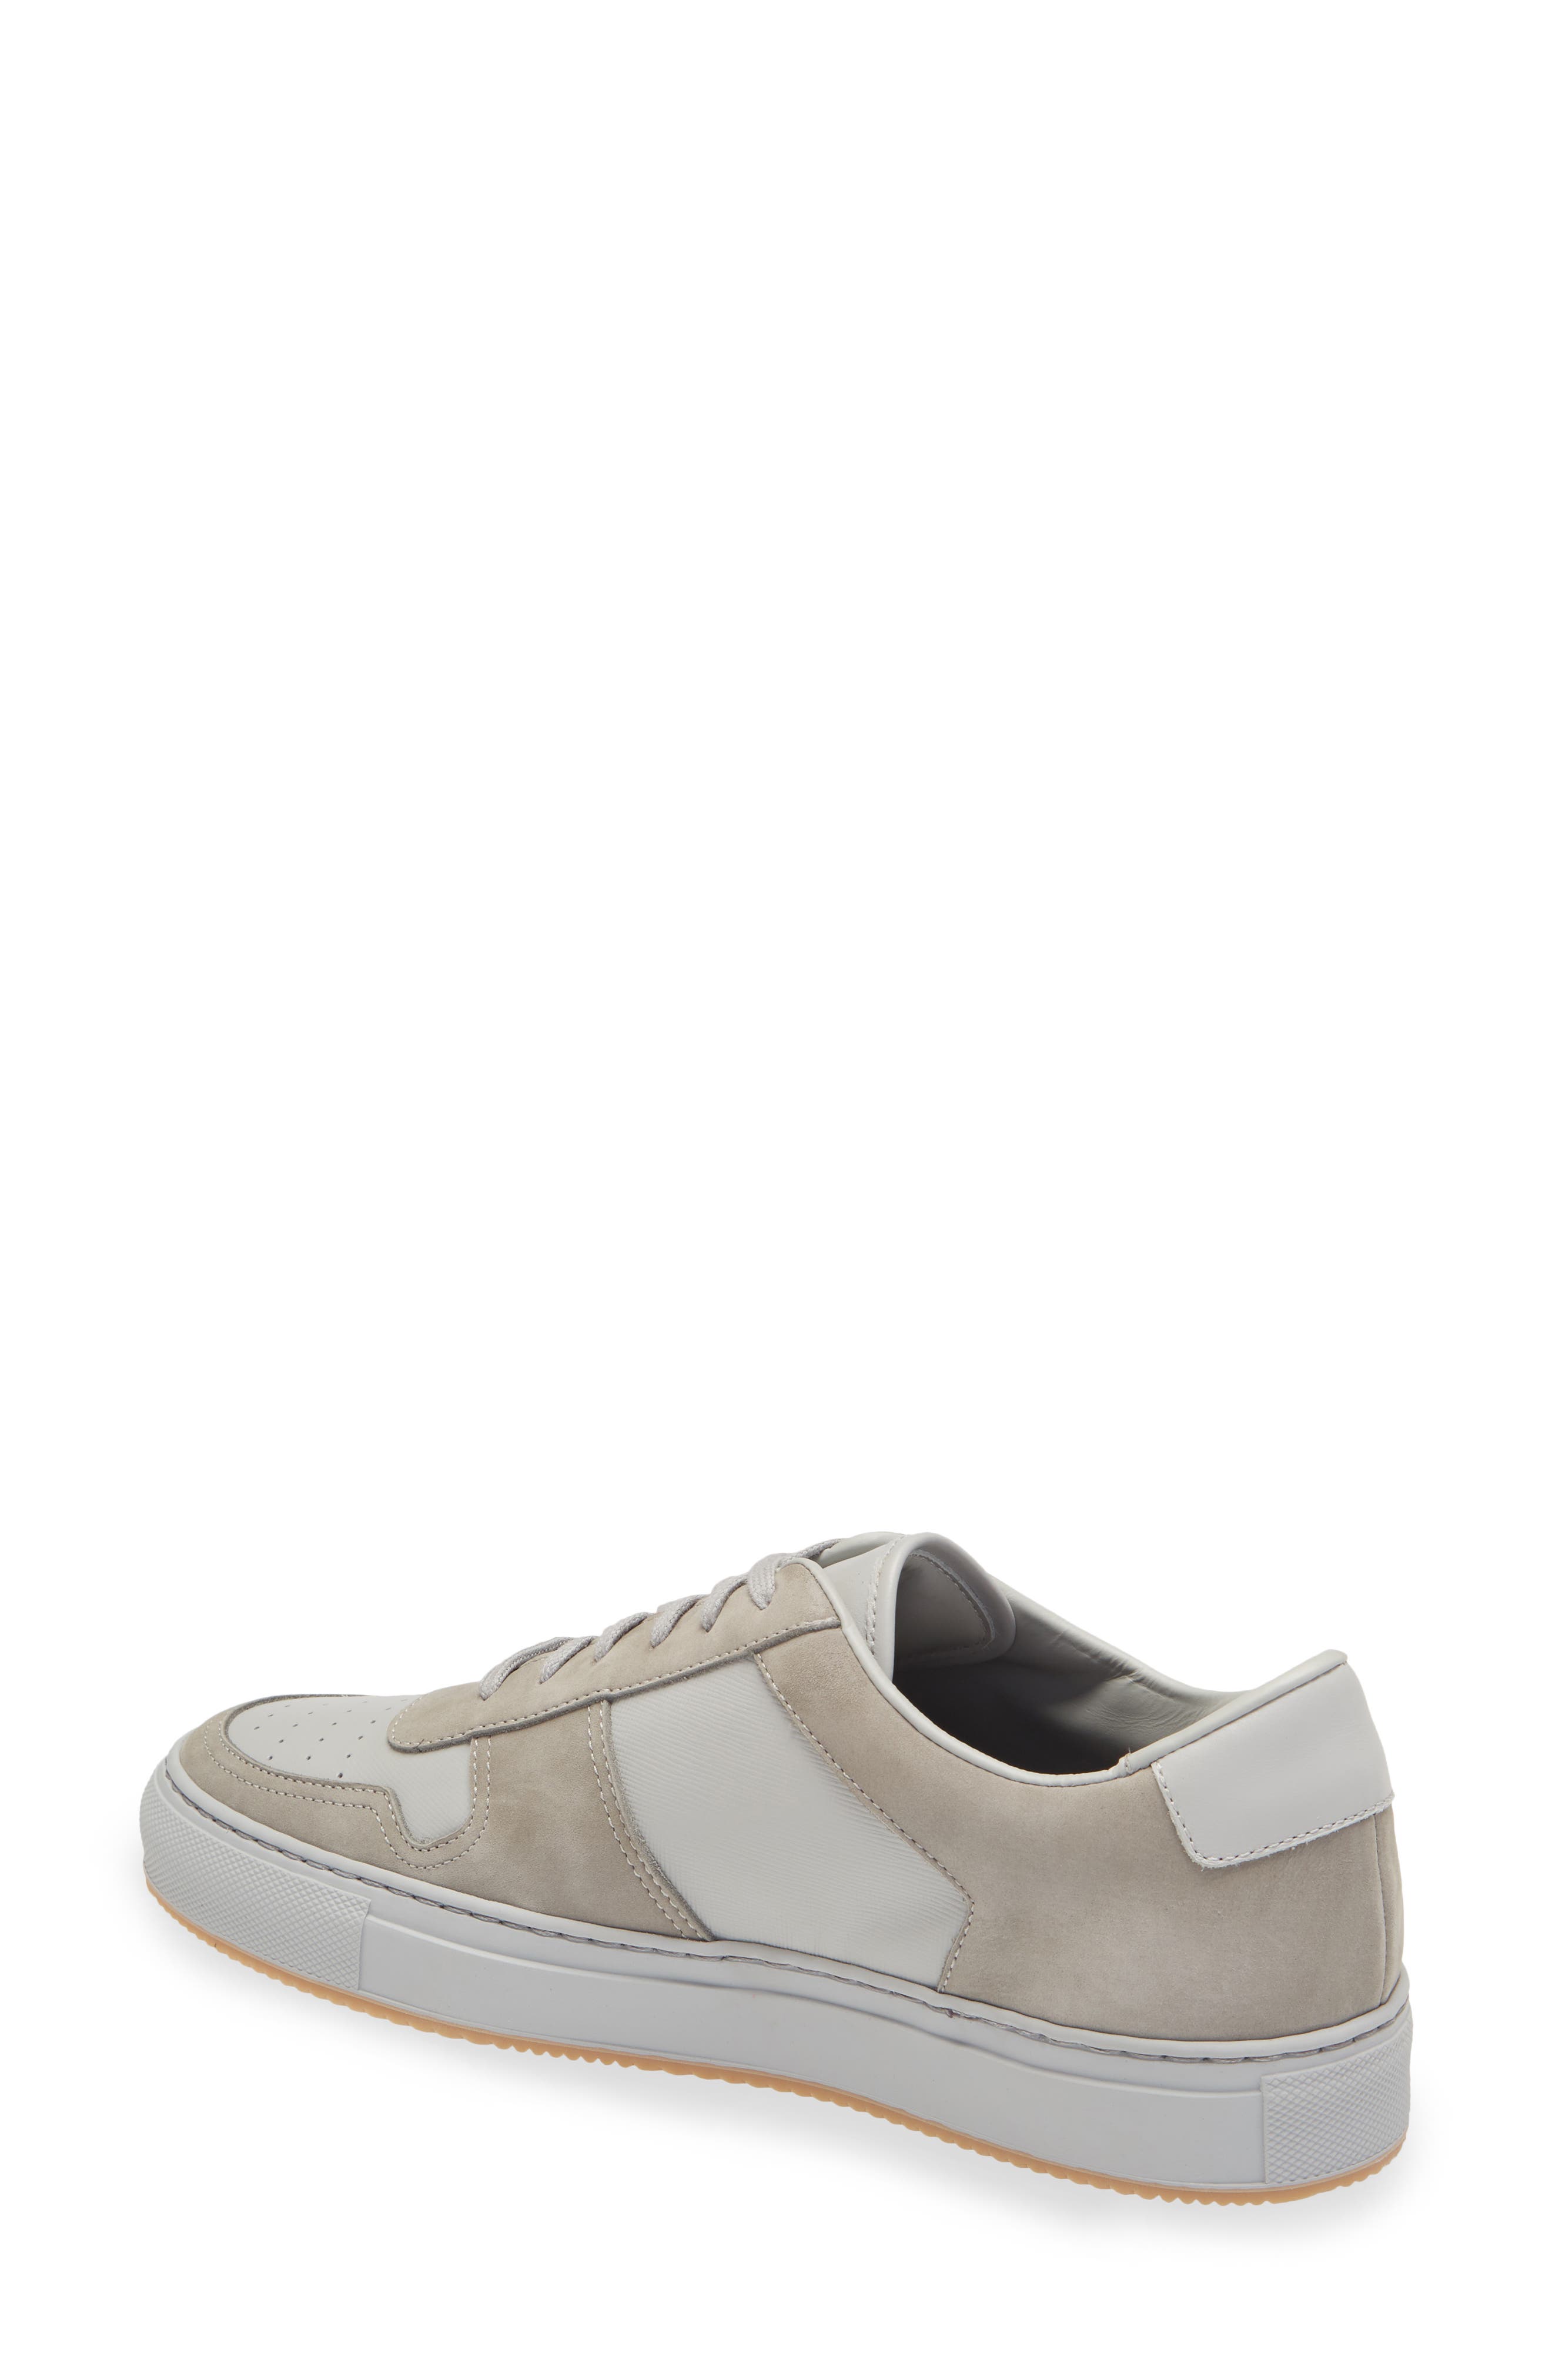 common projects bball low white